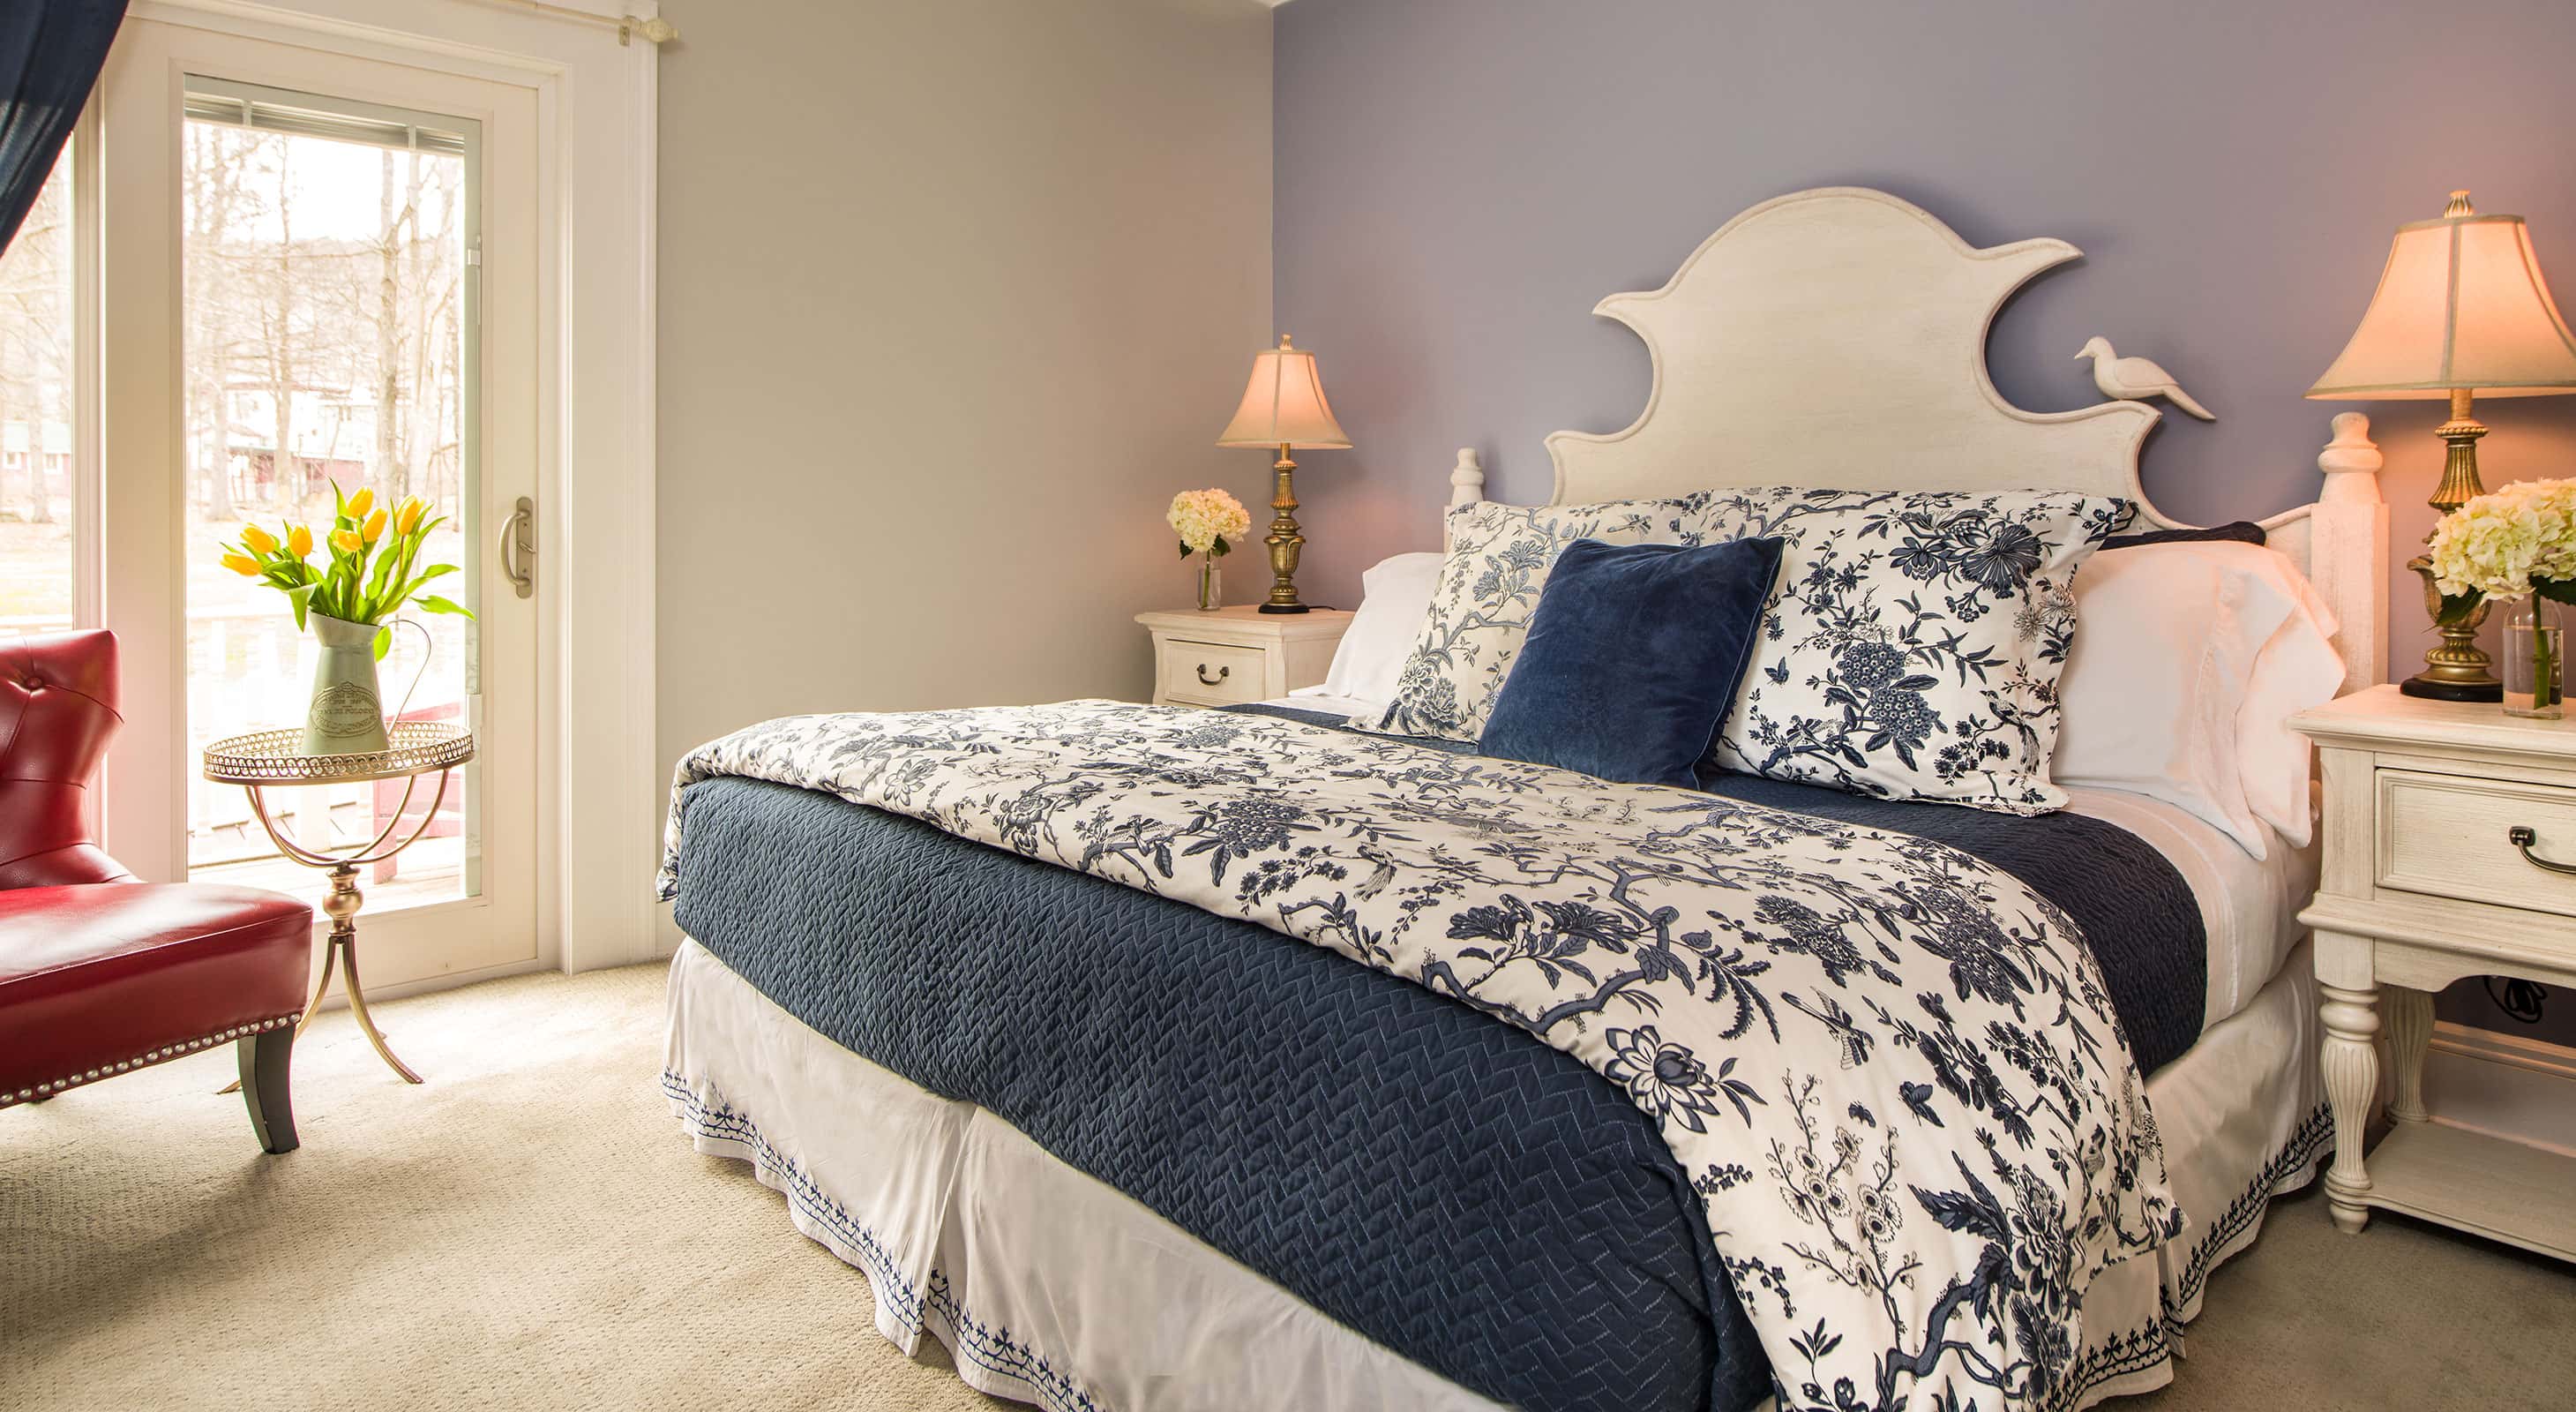 Petite Provence II's bed with soft pillows and intricate headboard